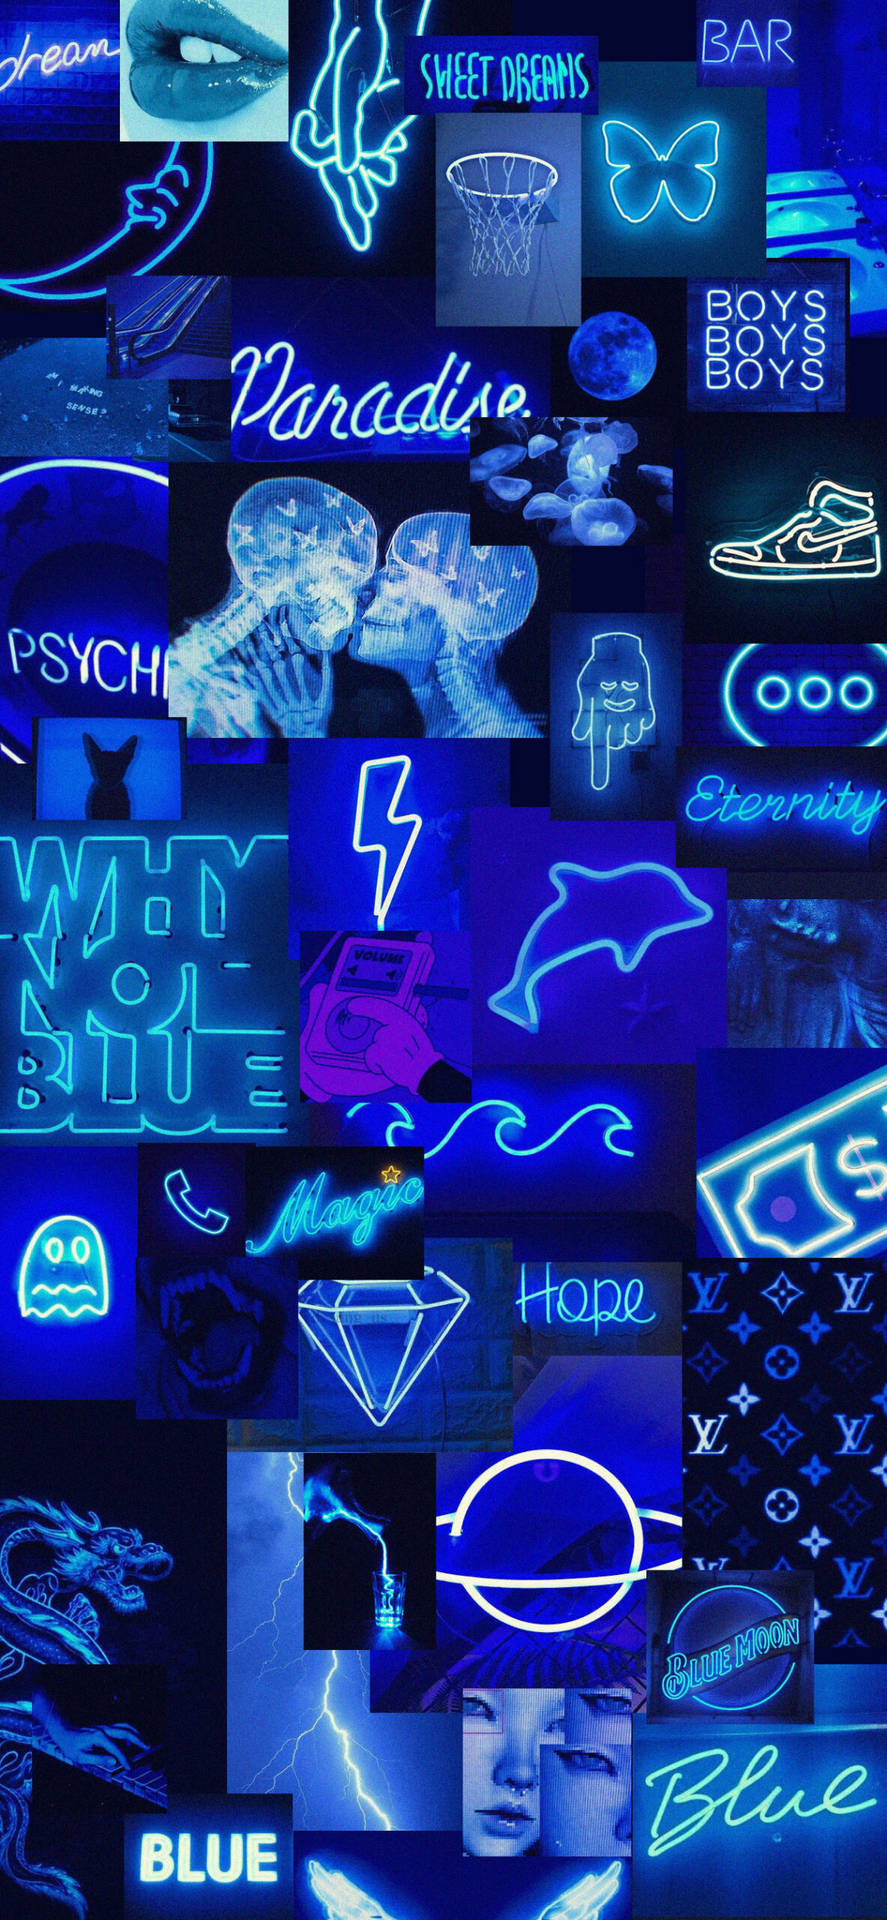 Download Aesthetic Blue Neon Collage Wallpaper | Wallpapers.com